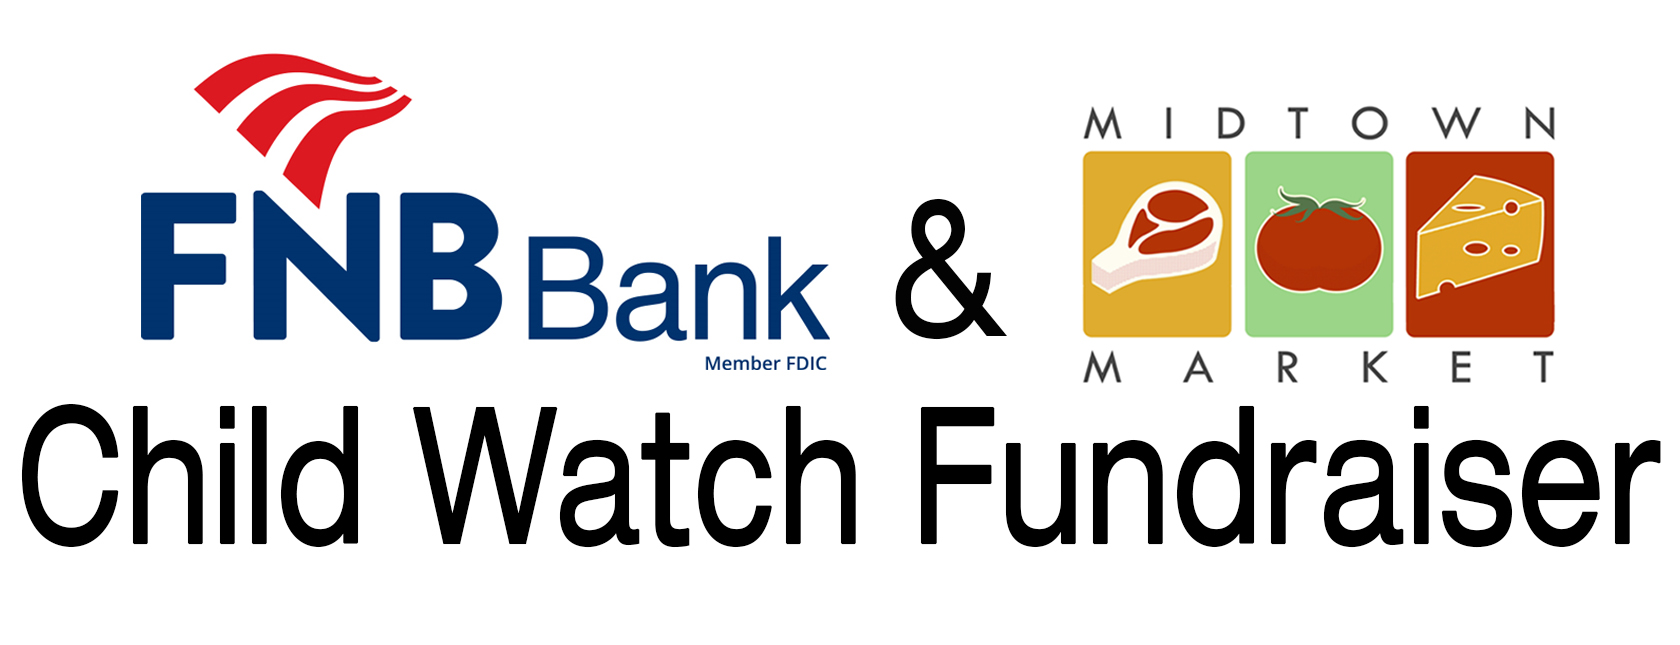 Midtown Market and FNB Child Watch Fundraiser